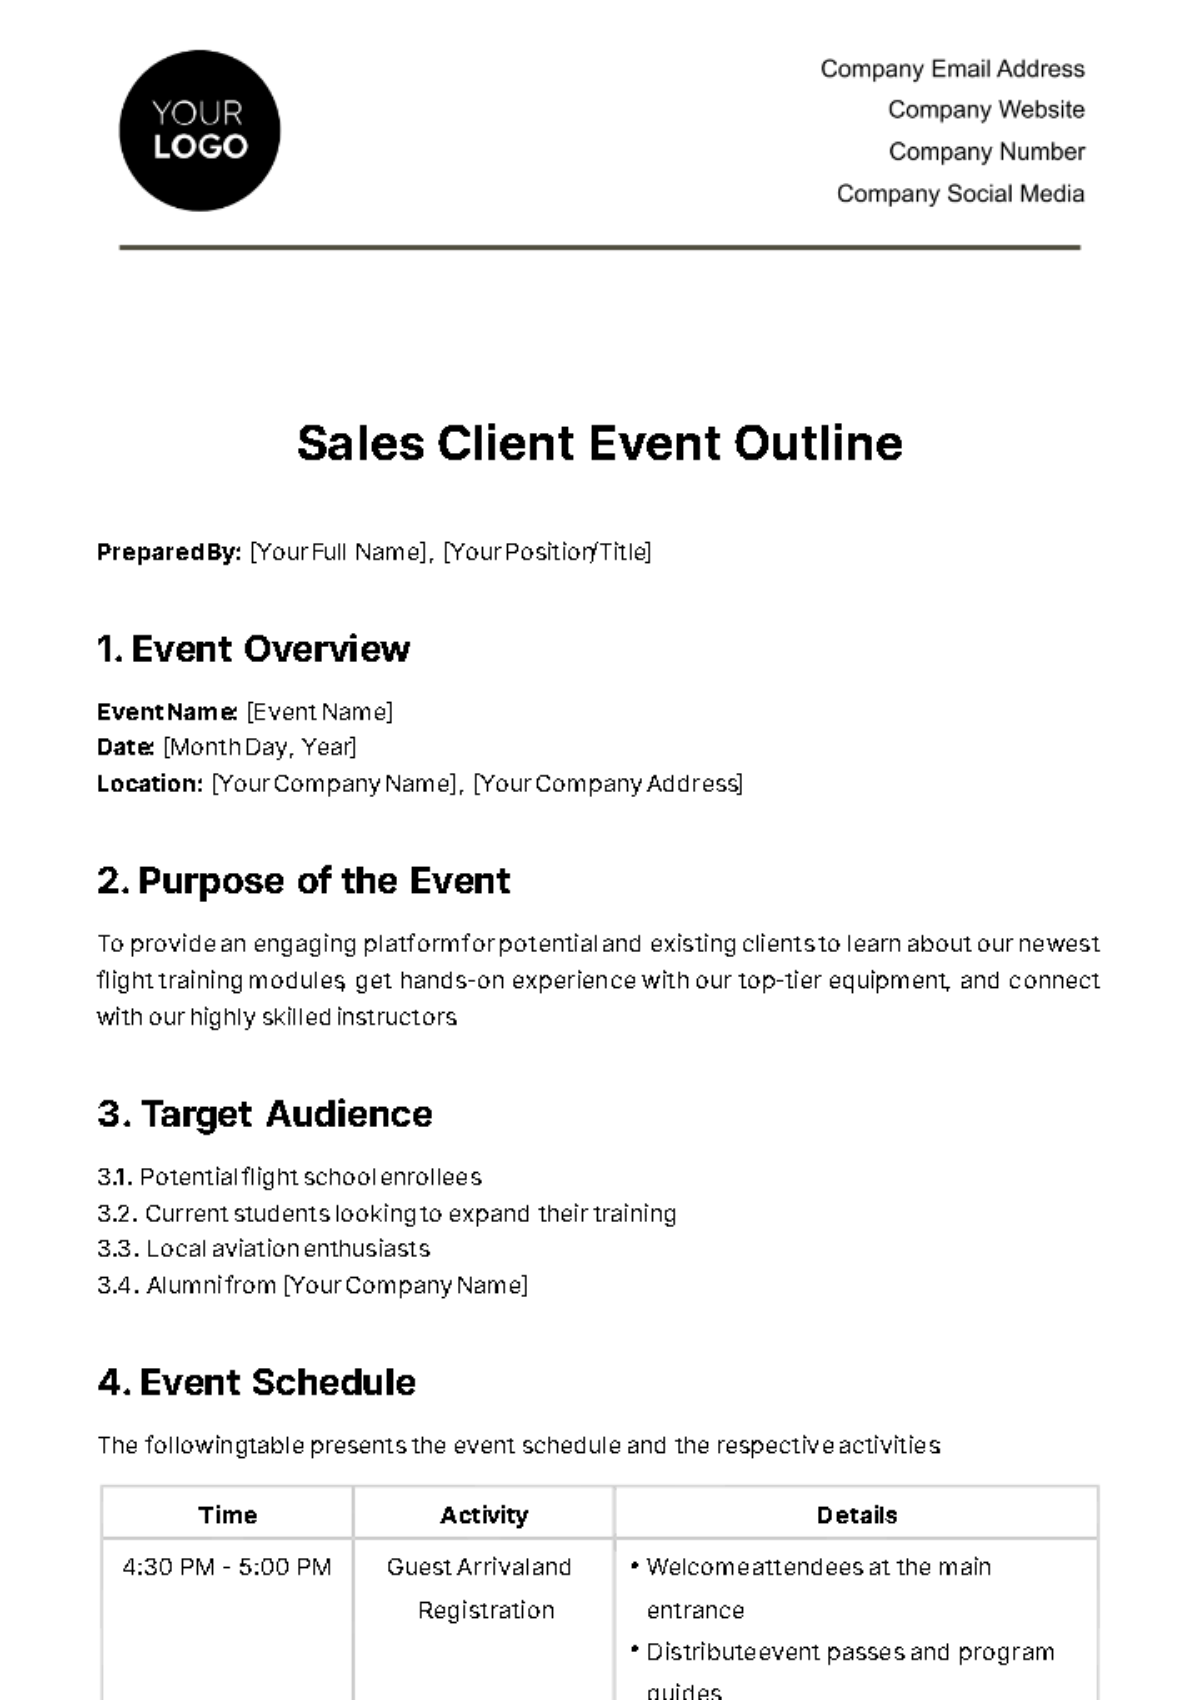 Free Sales Client Event Outline Template